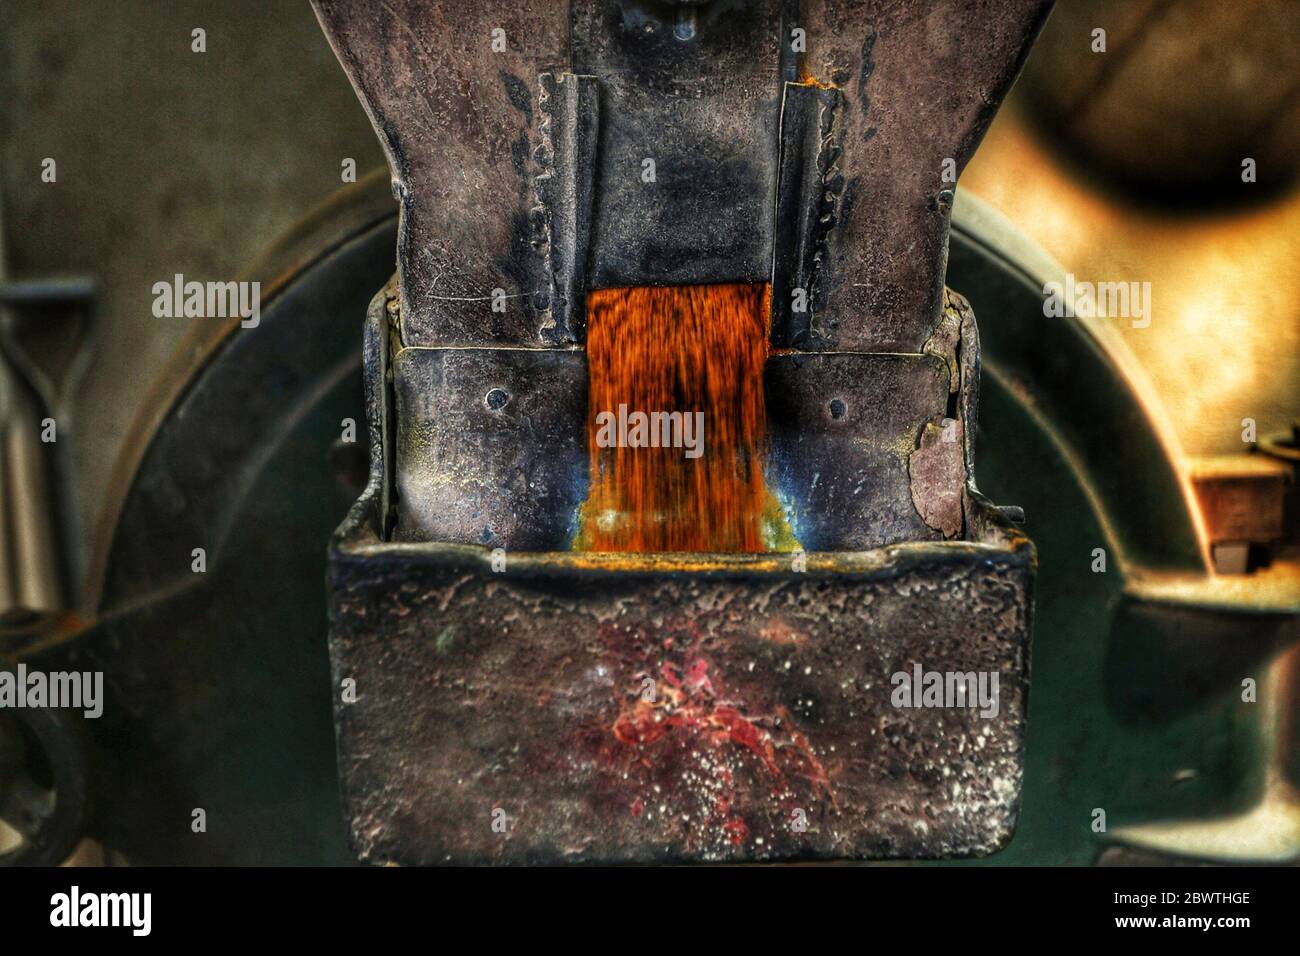 Kathmandu, Nepal. 3rd June, 2020. Turmeric powder is pictured as it come out from a grinding machine at a mill during nationwide lockdown amid COVID-19 outbreak in Kathmandu, capital of Nepal on June 3, 2020. Credit: Sunil Sharma/ZUMA Wire/Alamy Live News Stock Photo